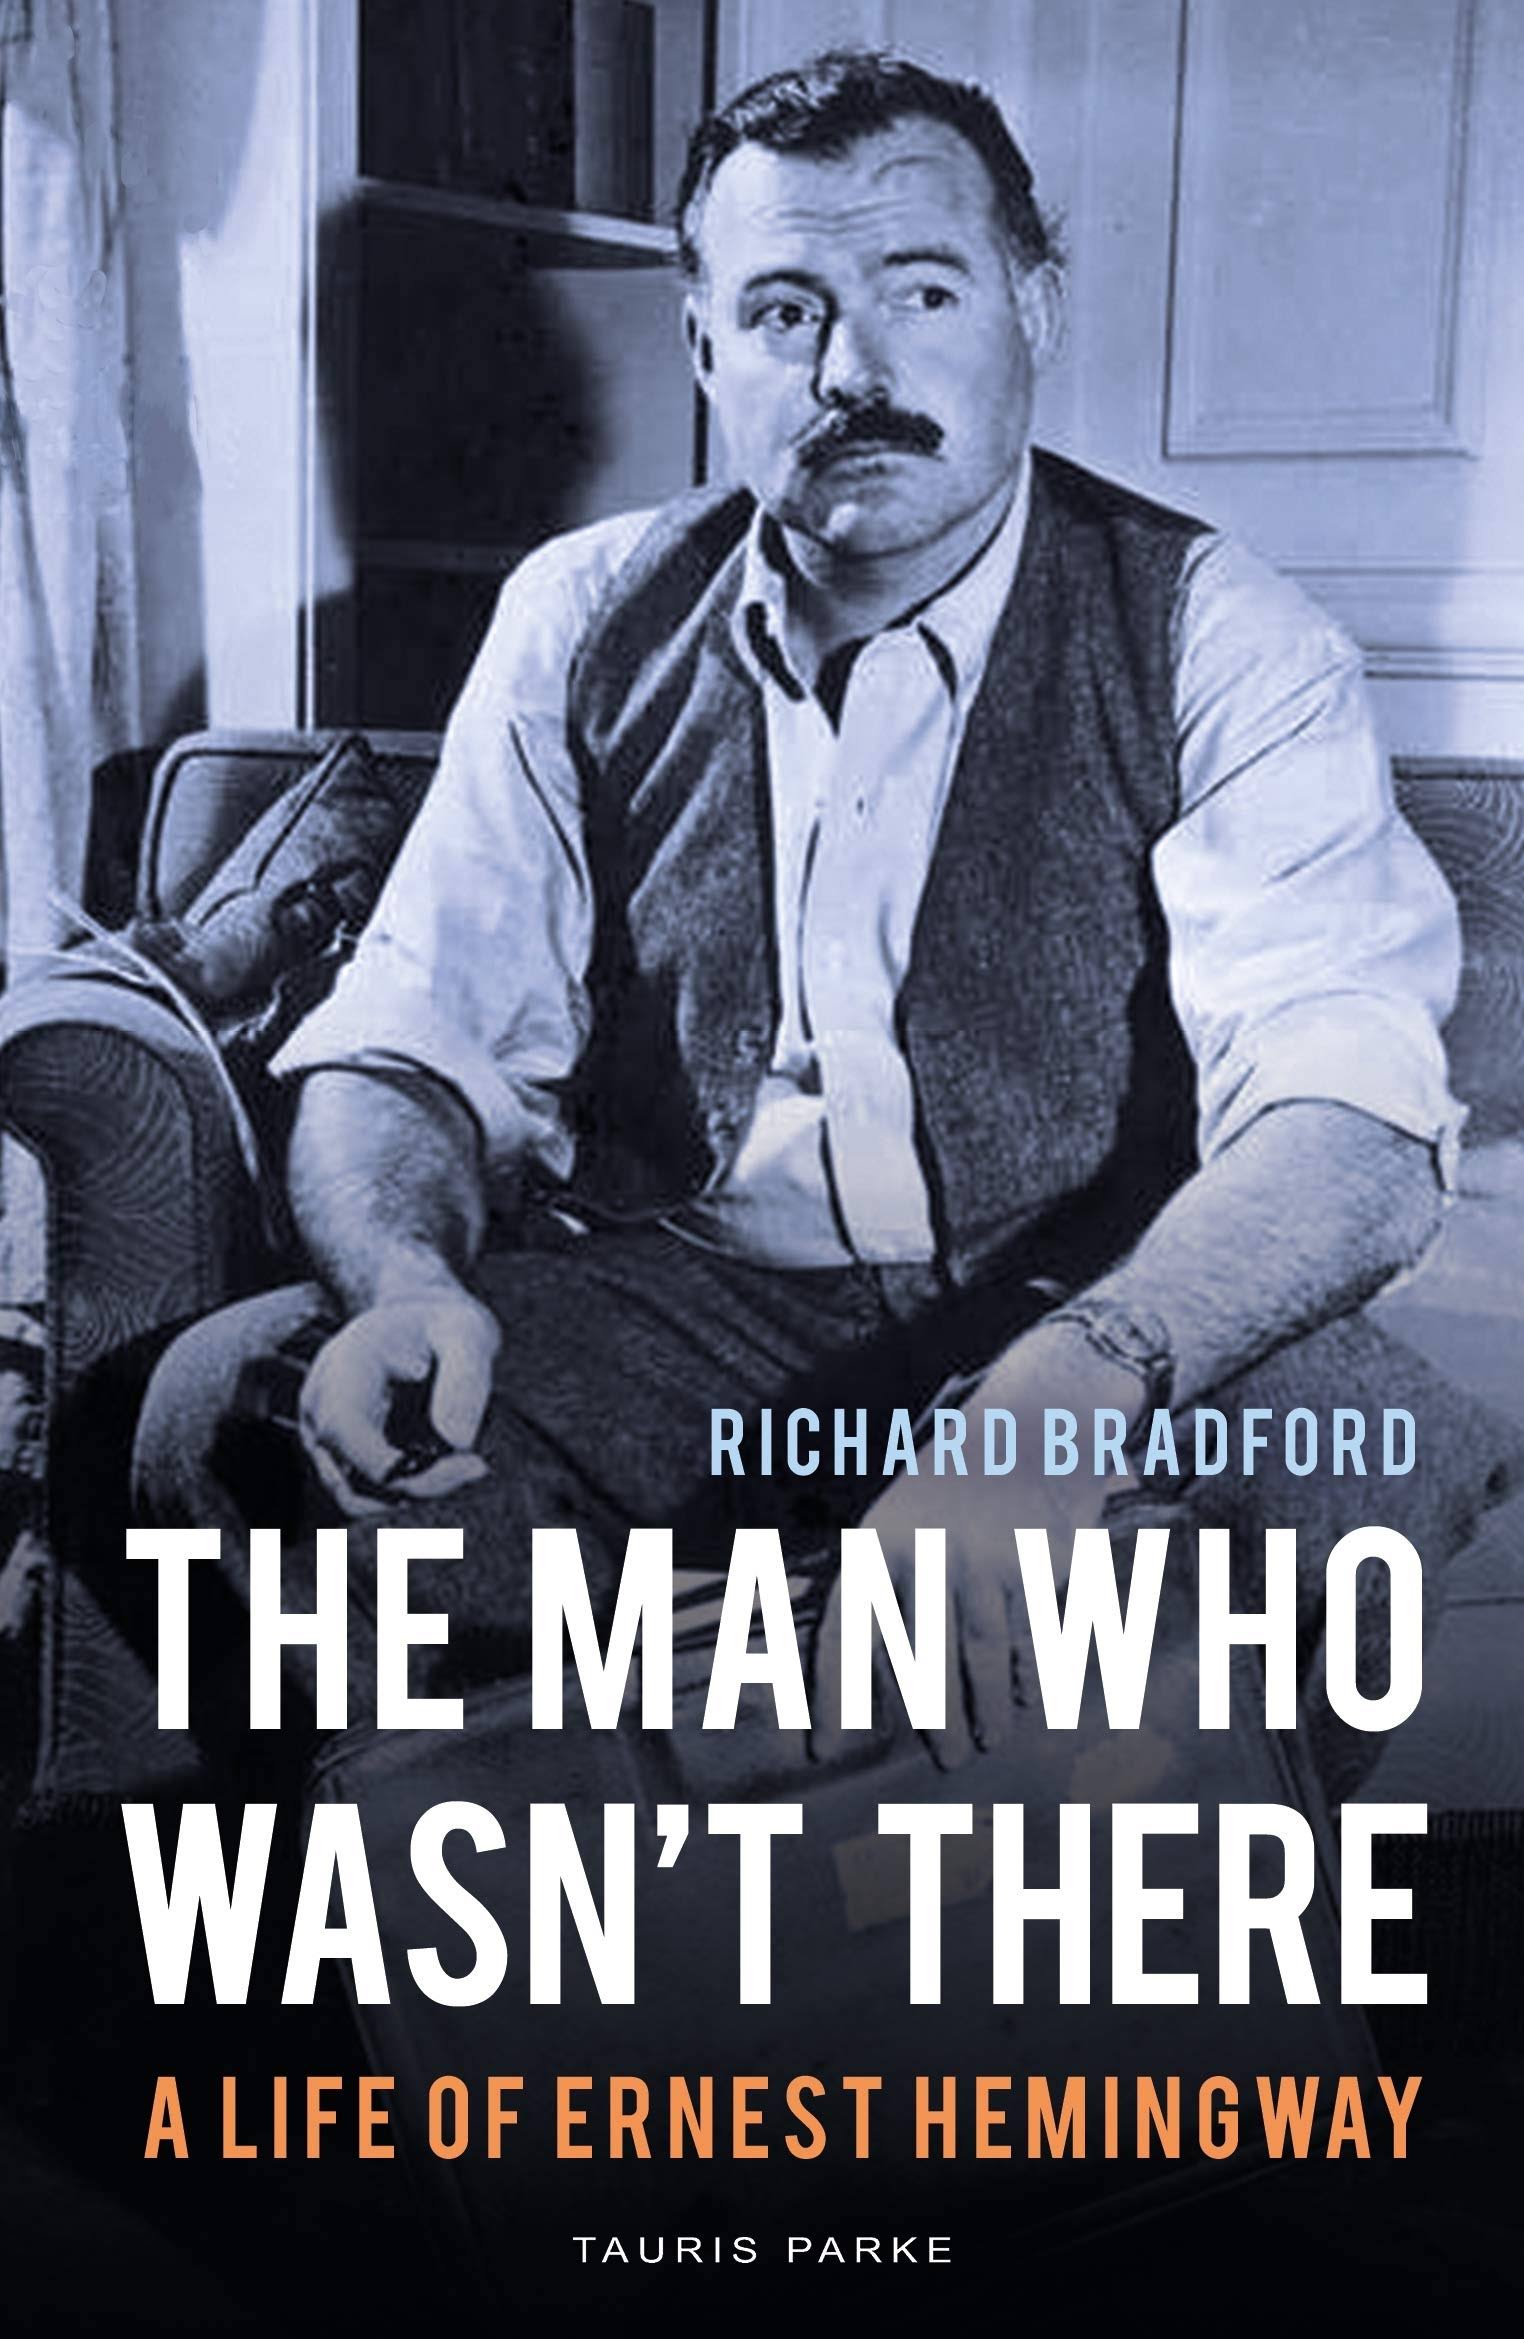 The Man Who Wasn't There: A Life of Ernest Hemingway [Book]